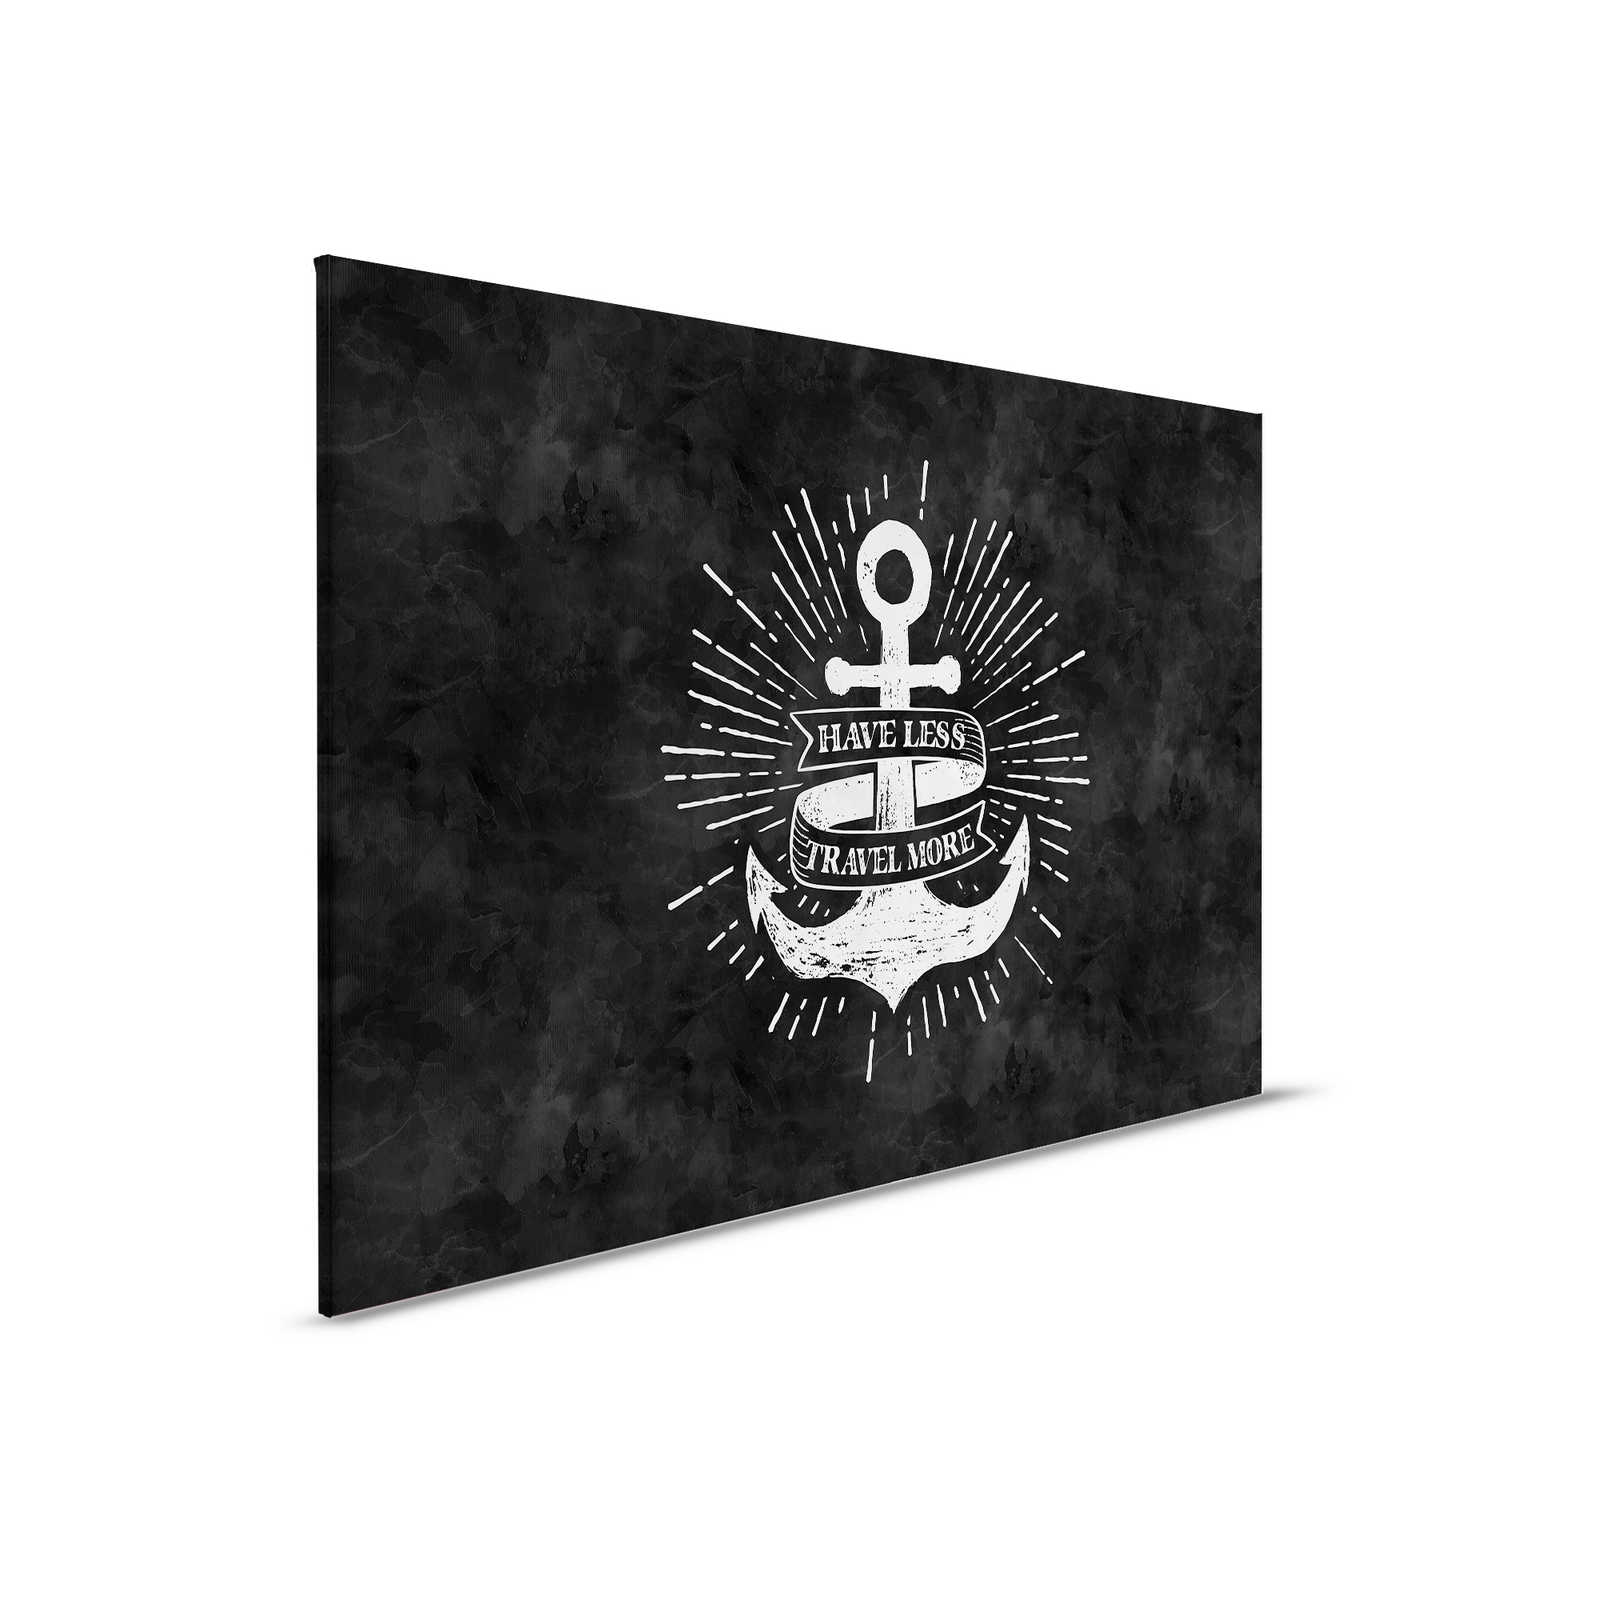         Black and White Chalkboard Look Canvas Painting Anchor Design - 0.90 m x 0.60 m
    